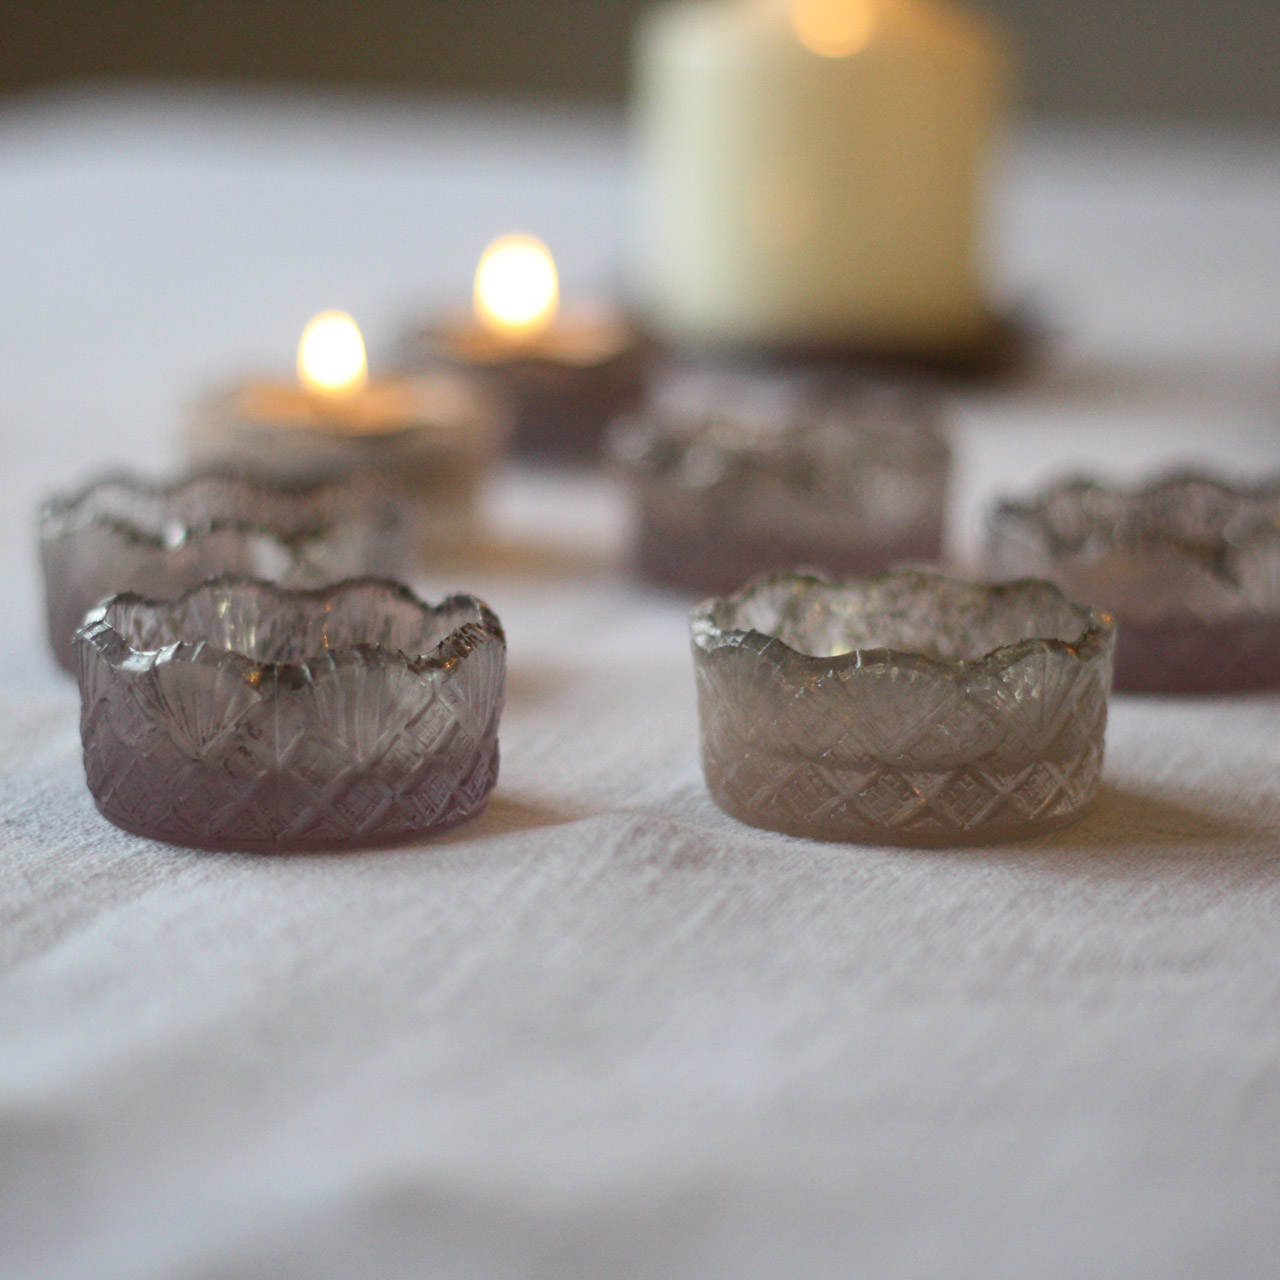 Mini Dusky  and Nude Pink Tea Light Holders - perfect for wedding decorations - available from @theweddingomd